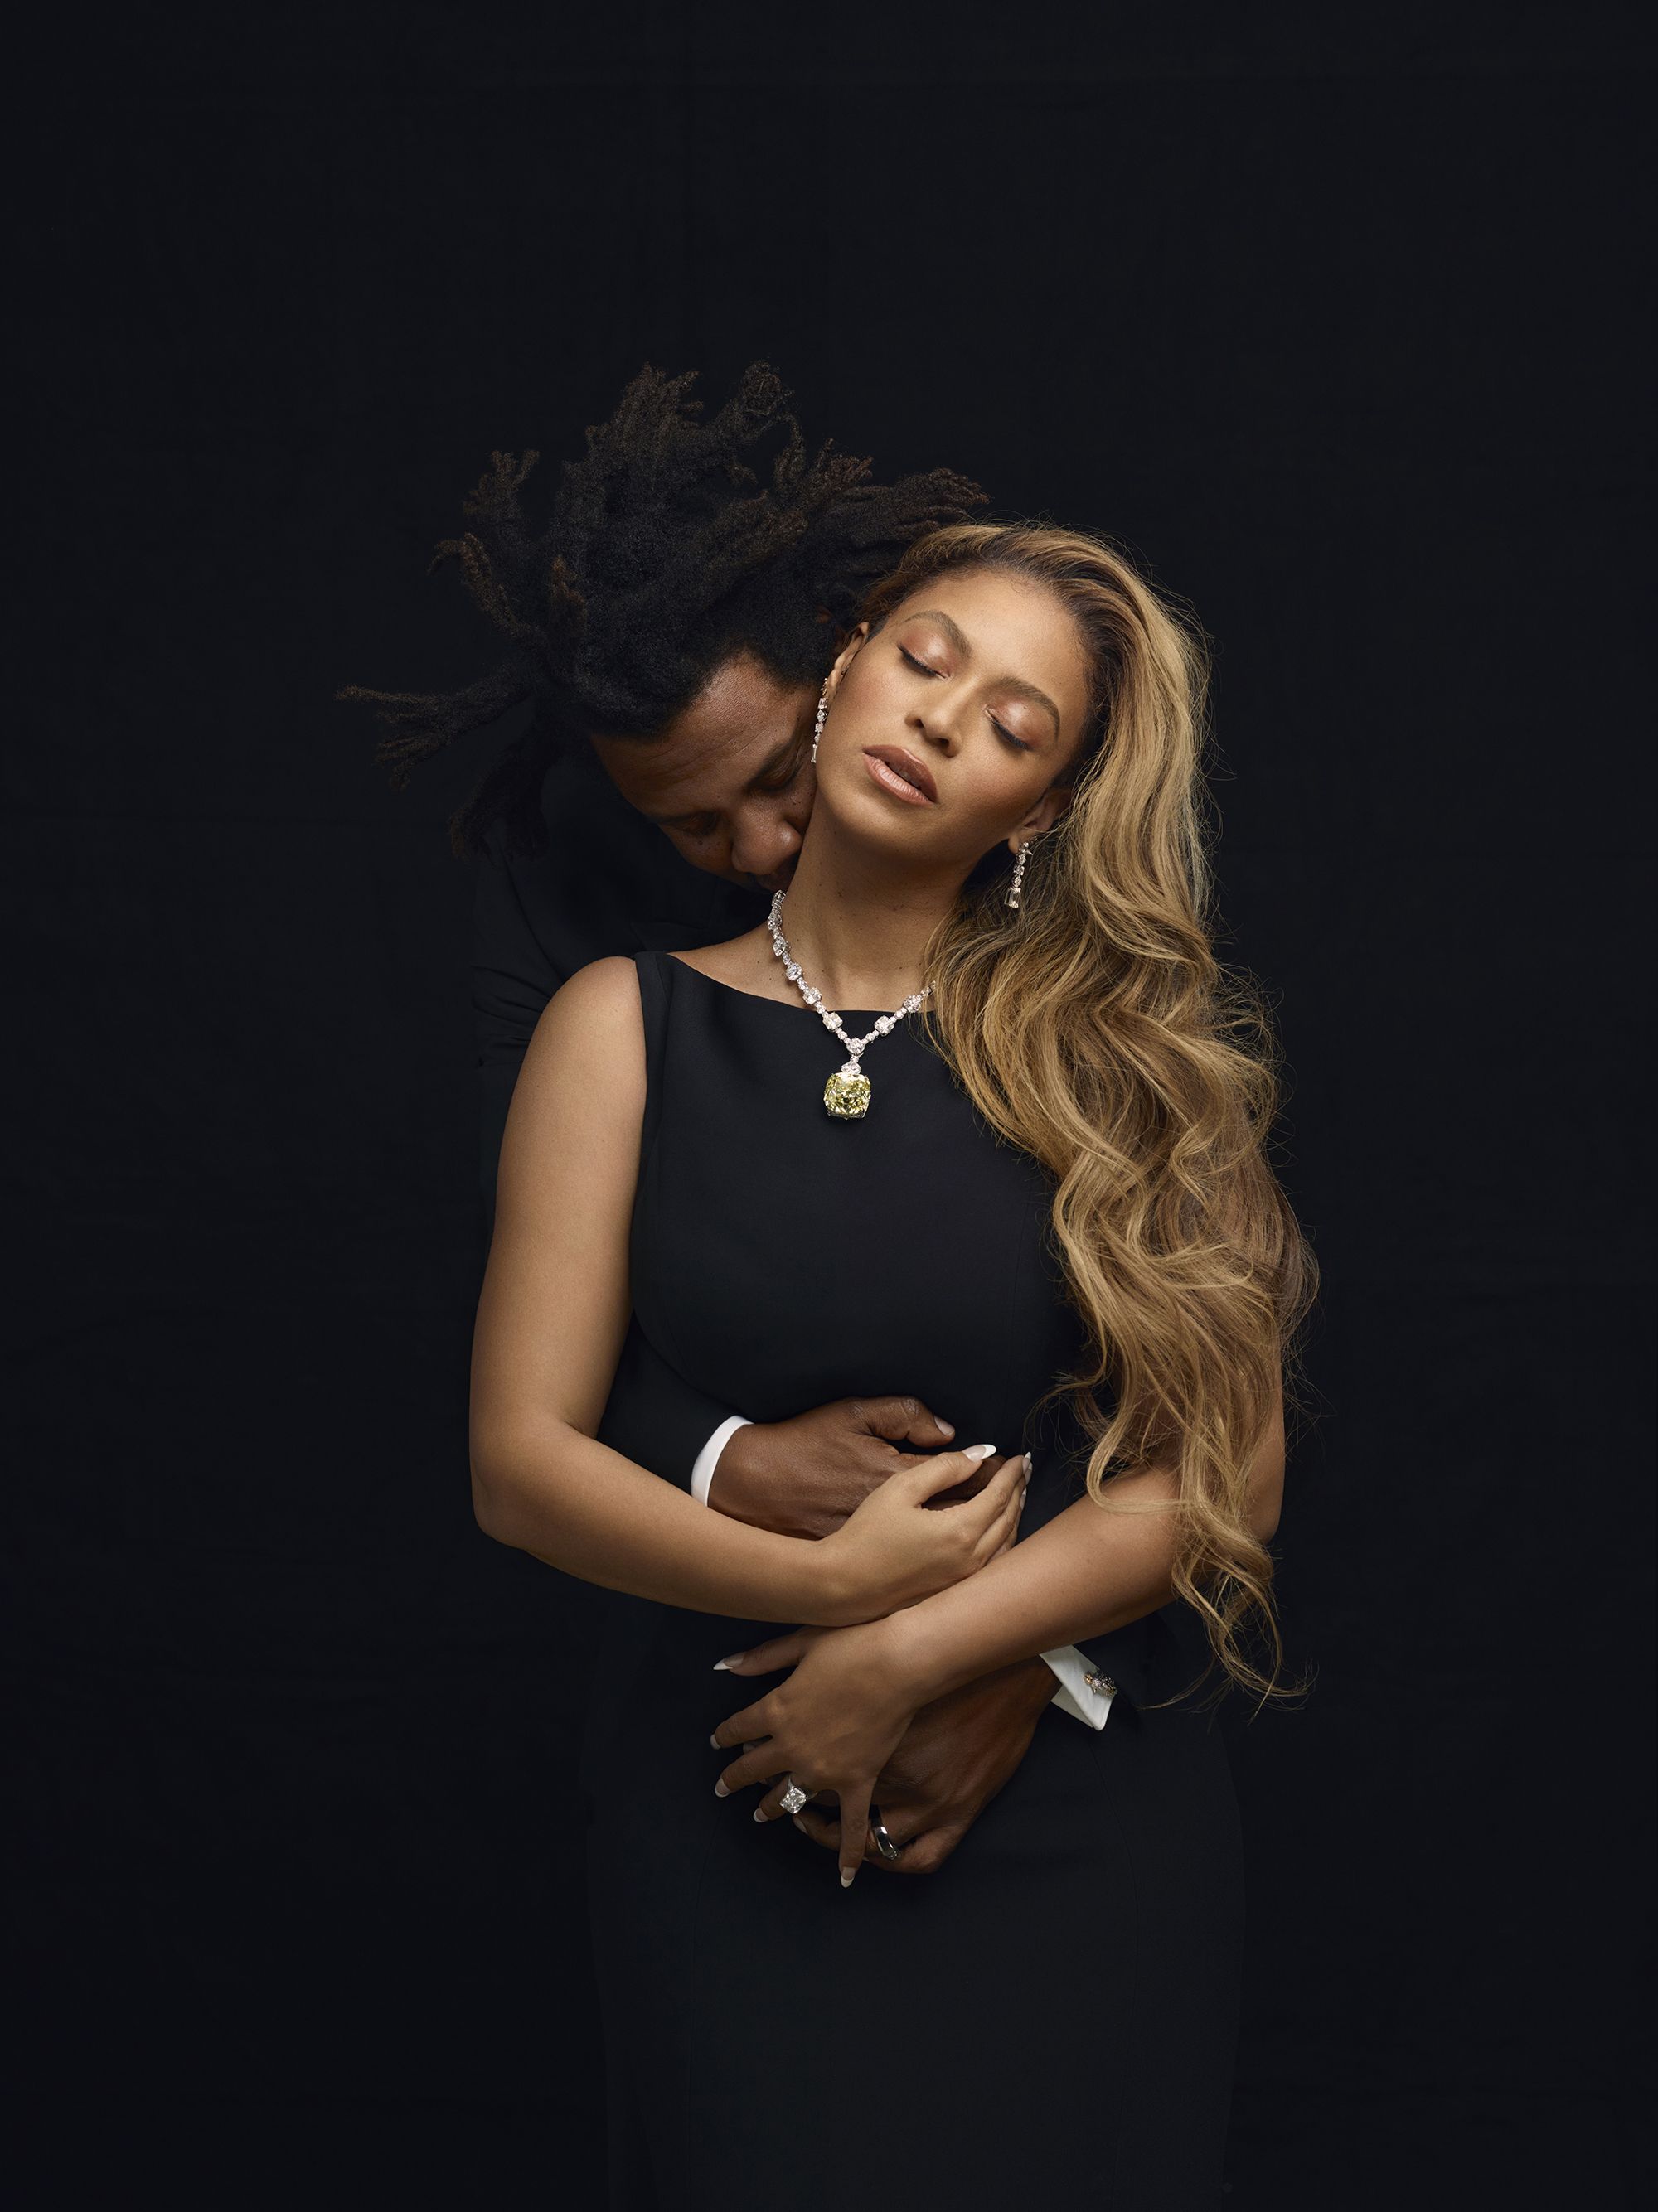 Beyoncé and JAY-Z Release Dreamy Tiffany & Co. Campaign Film